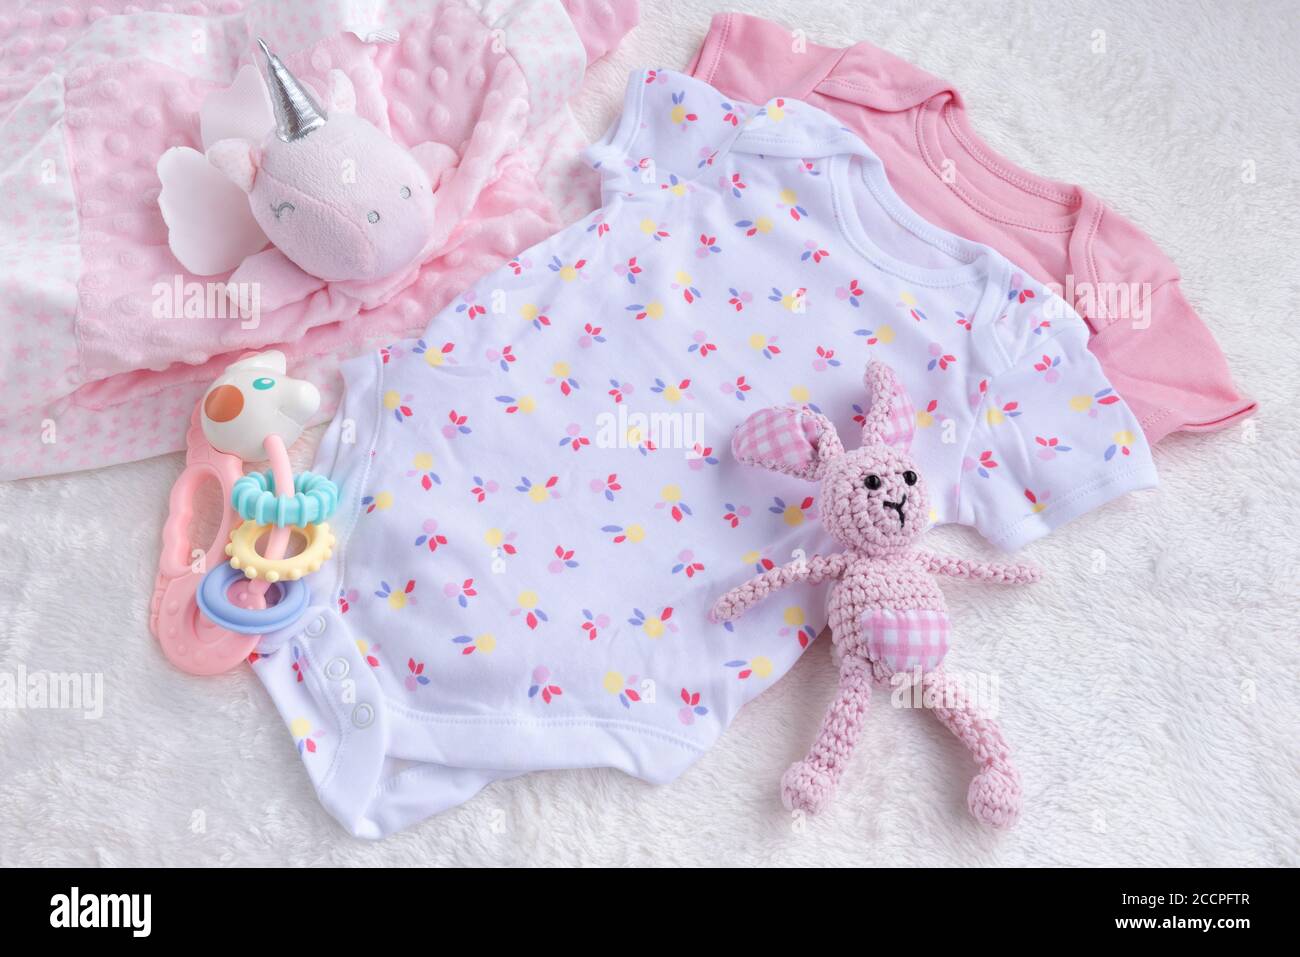 Baby Mockup. Bodysuits for baby girl And Rattle Toy On A White Fur Carpet. Newborn Baby Concept. Baby Girl Clothes Set. Stock Photo